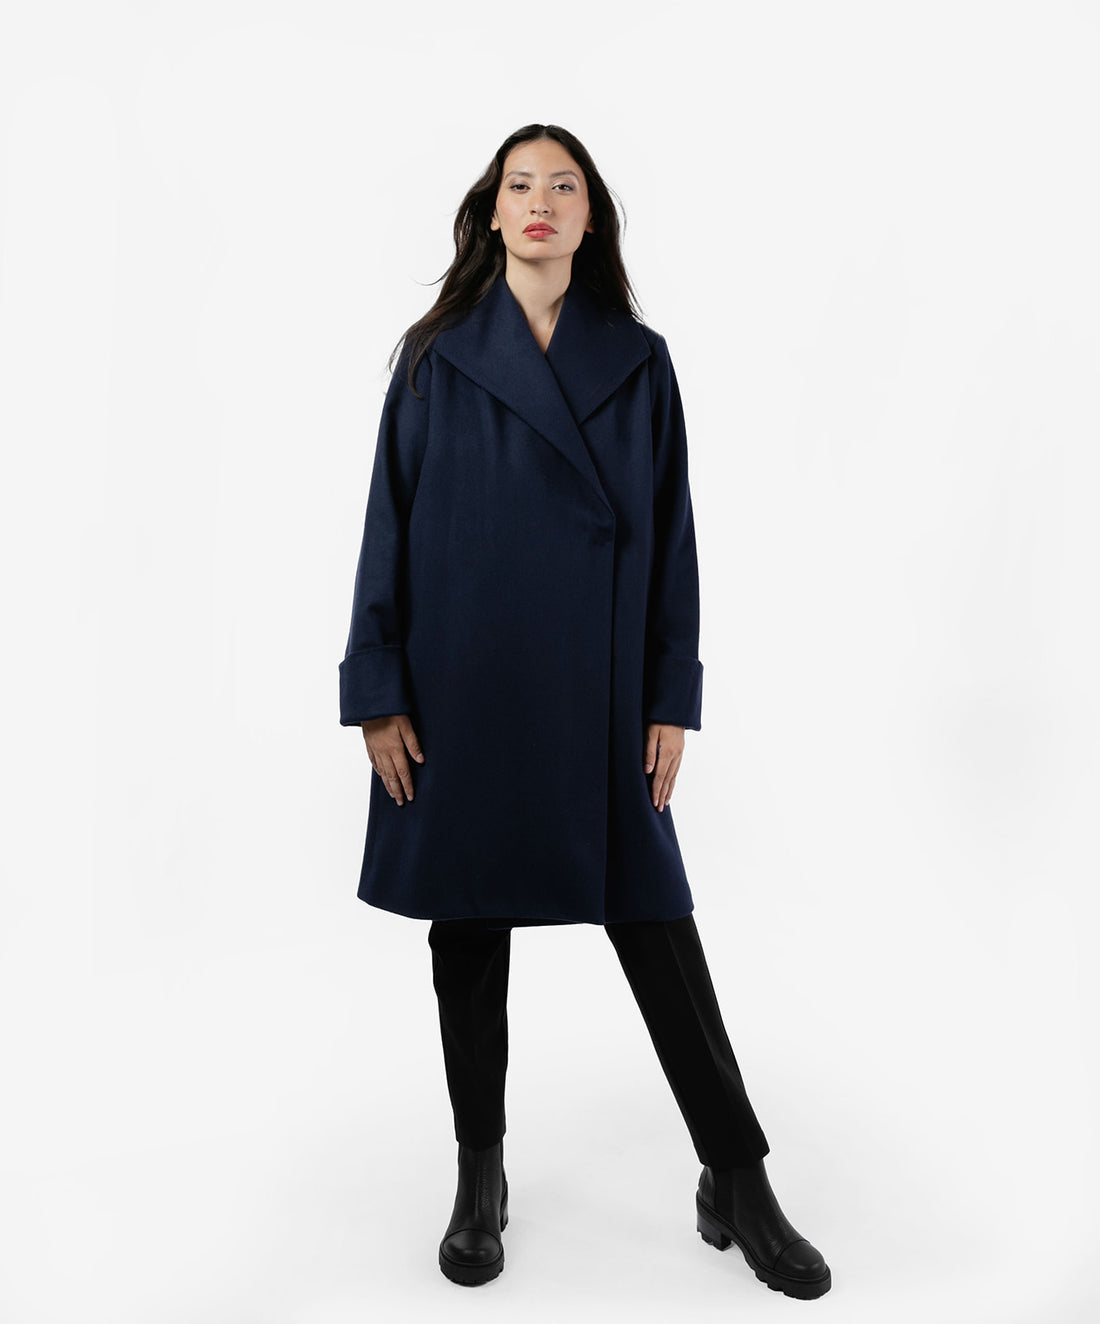 The Southport Overcoat - Navy